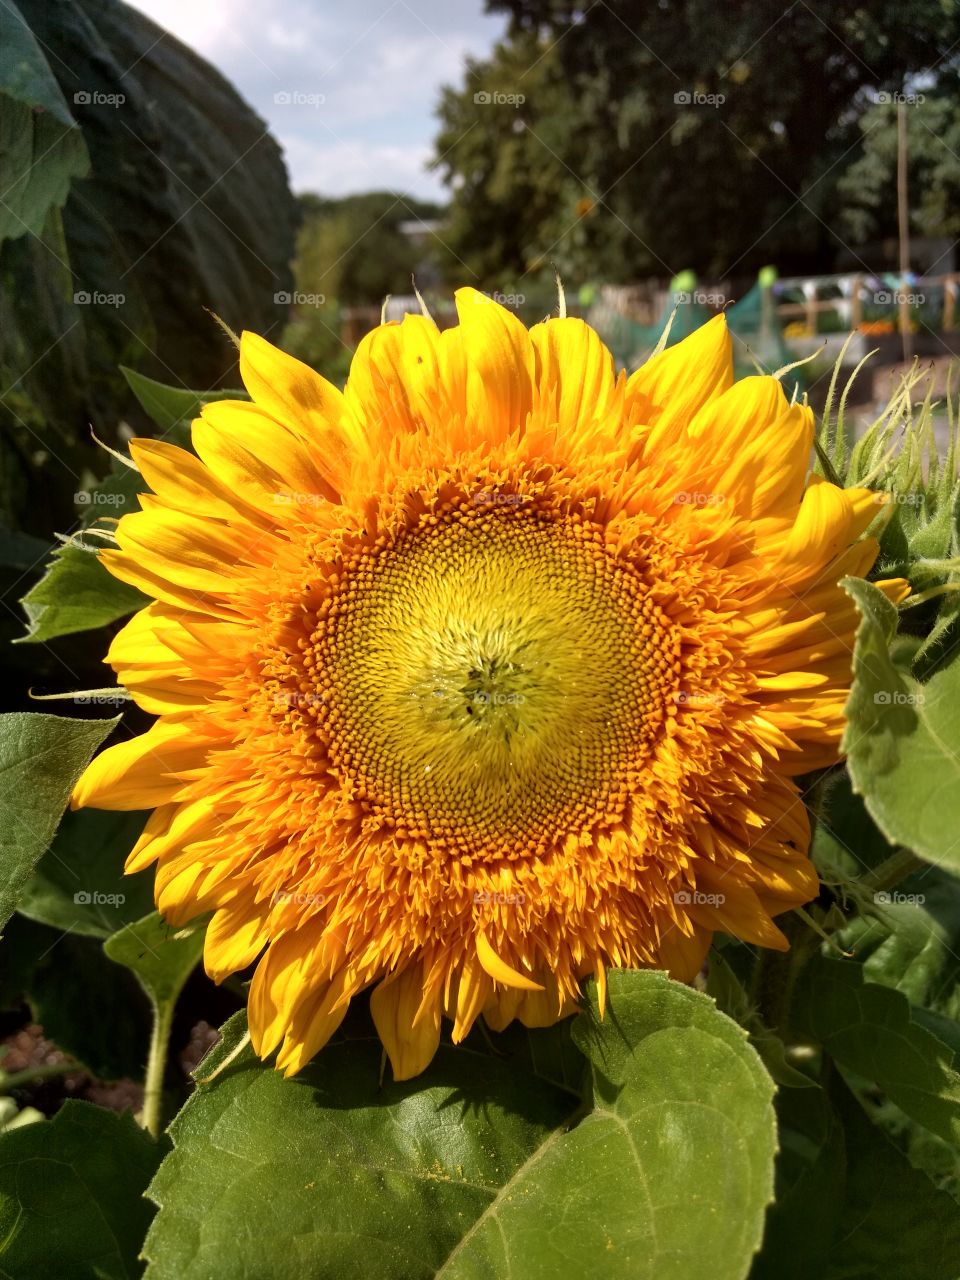 yellow sunflower in sunlight surrounded by sunflower leaves